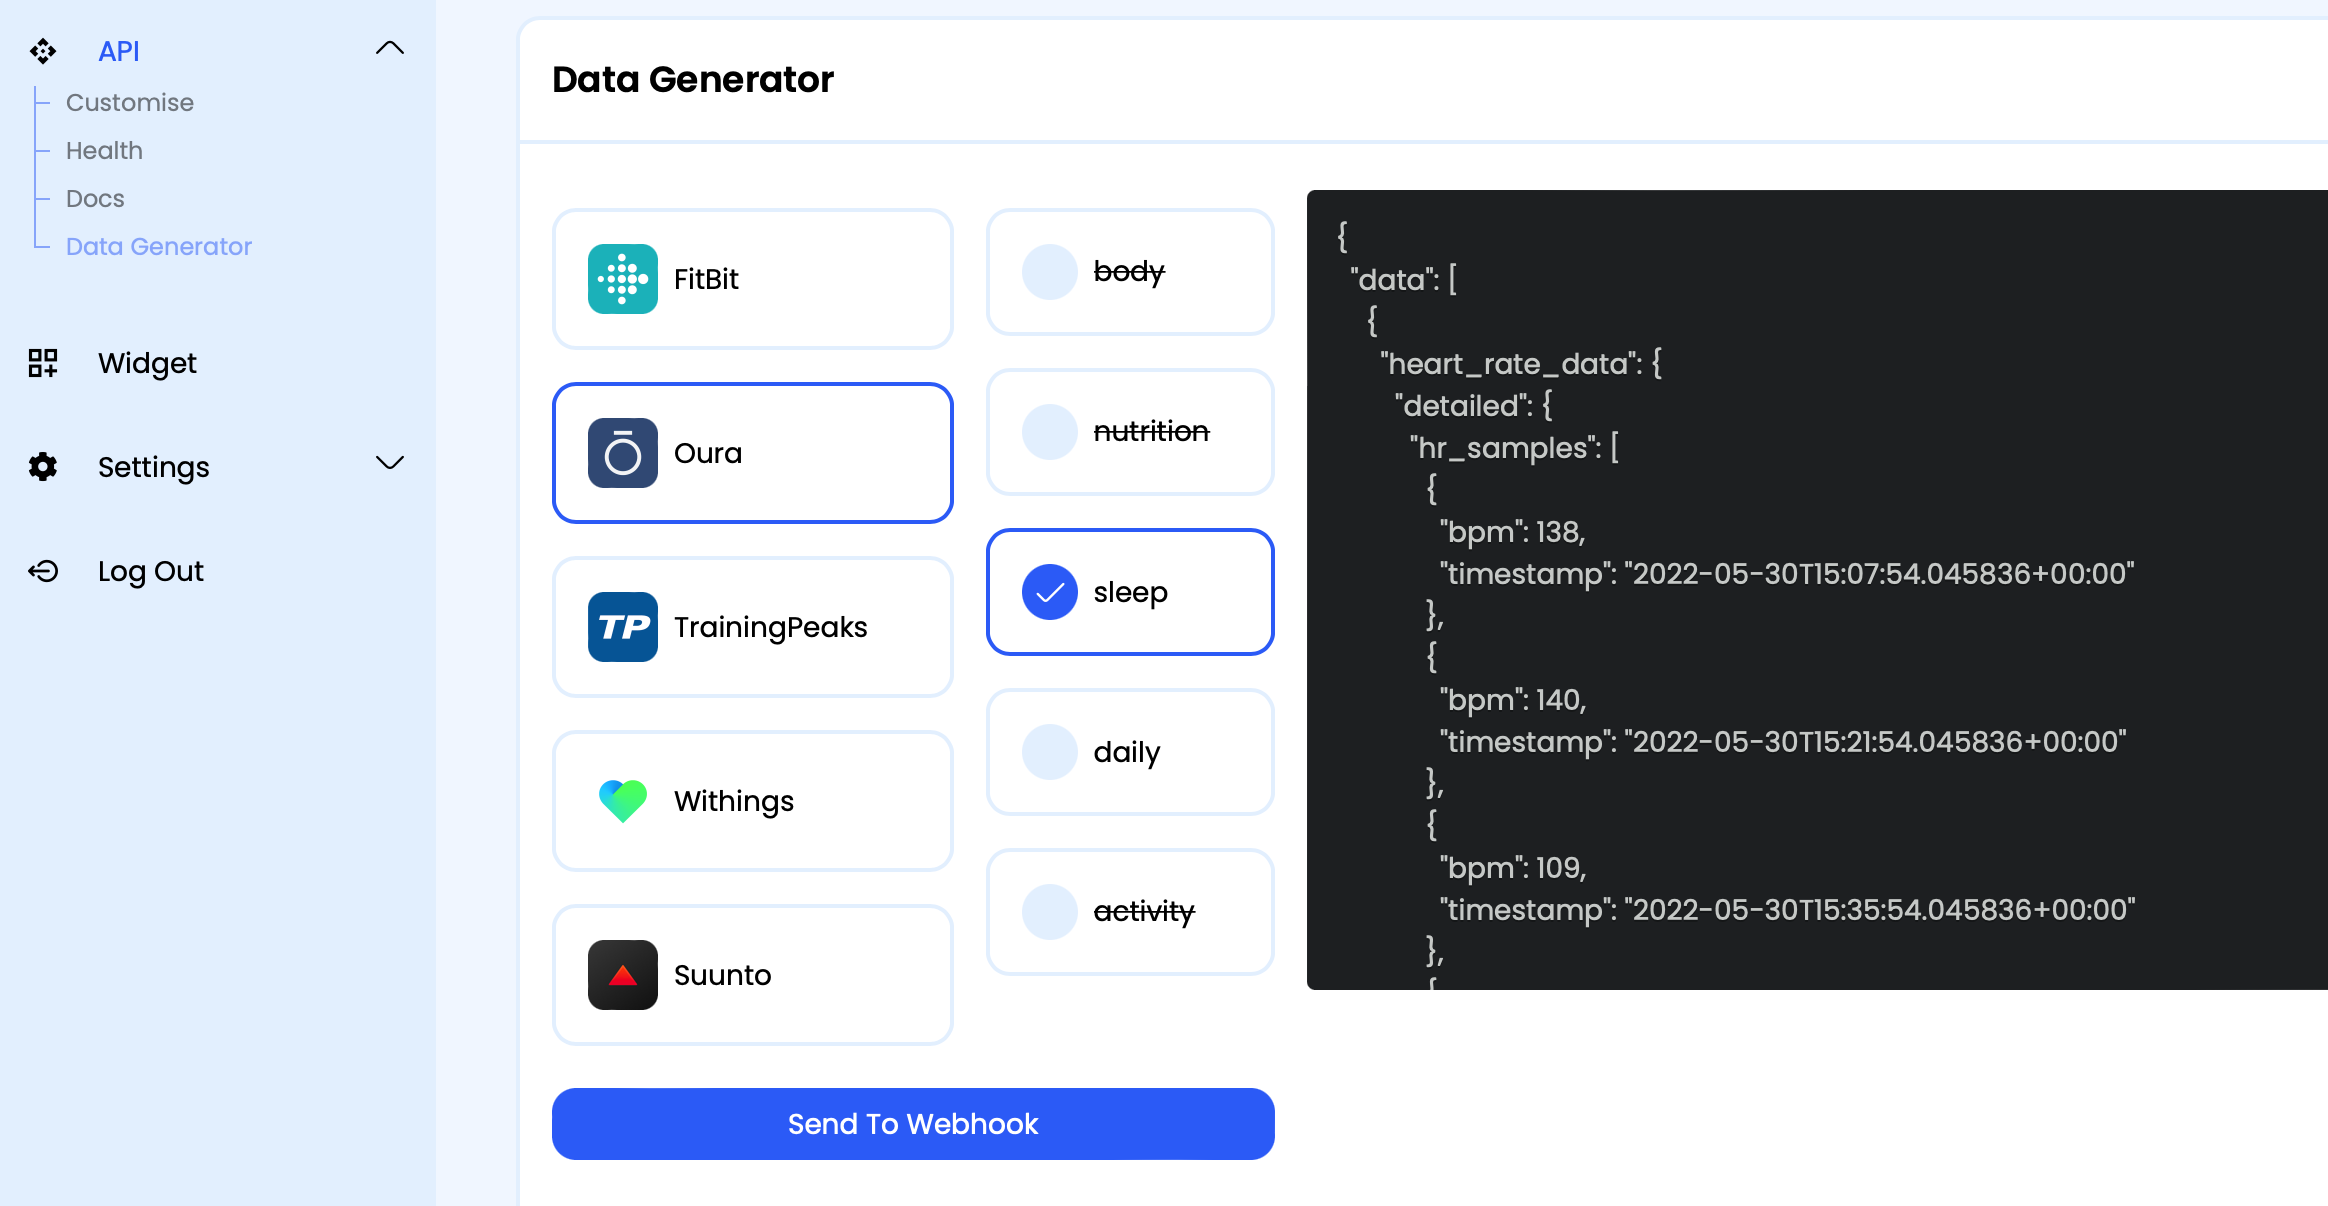 Generate data using the data generator to test your webhook endpoint